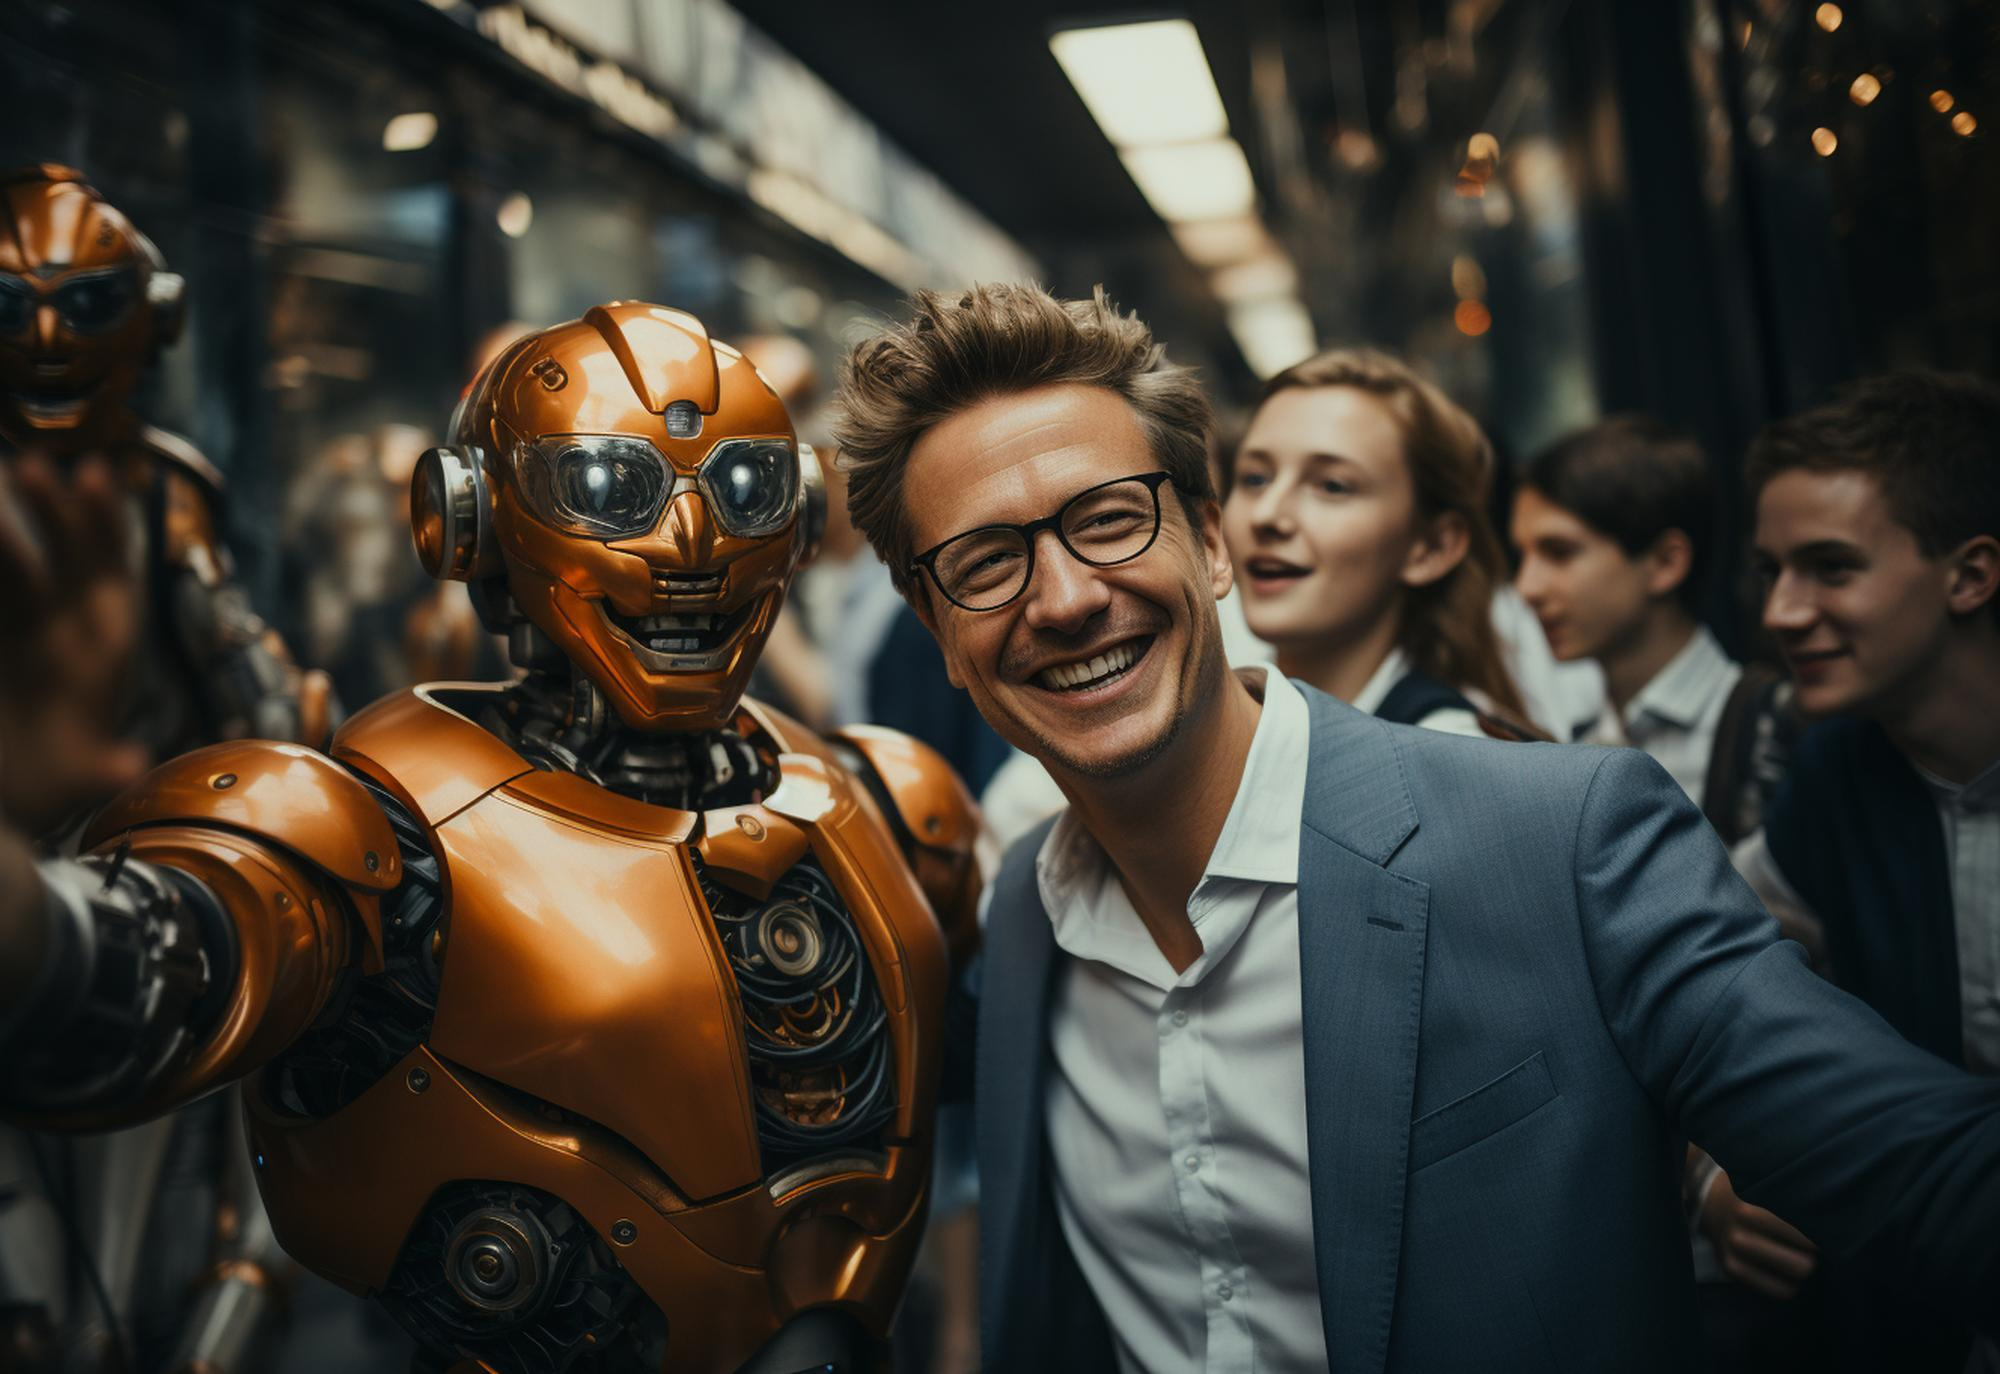 business man and suit smiling with robot in a photo